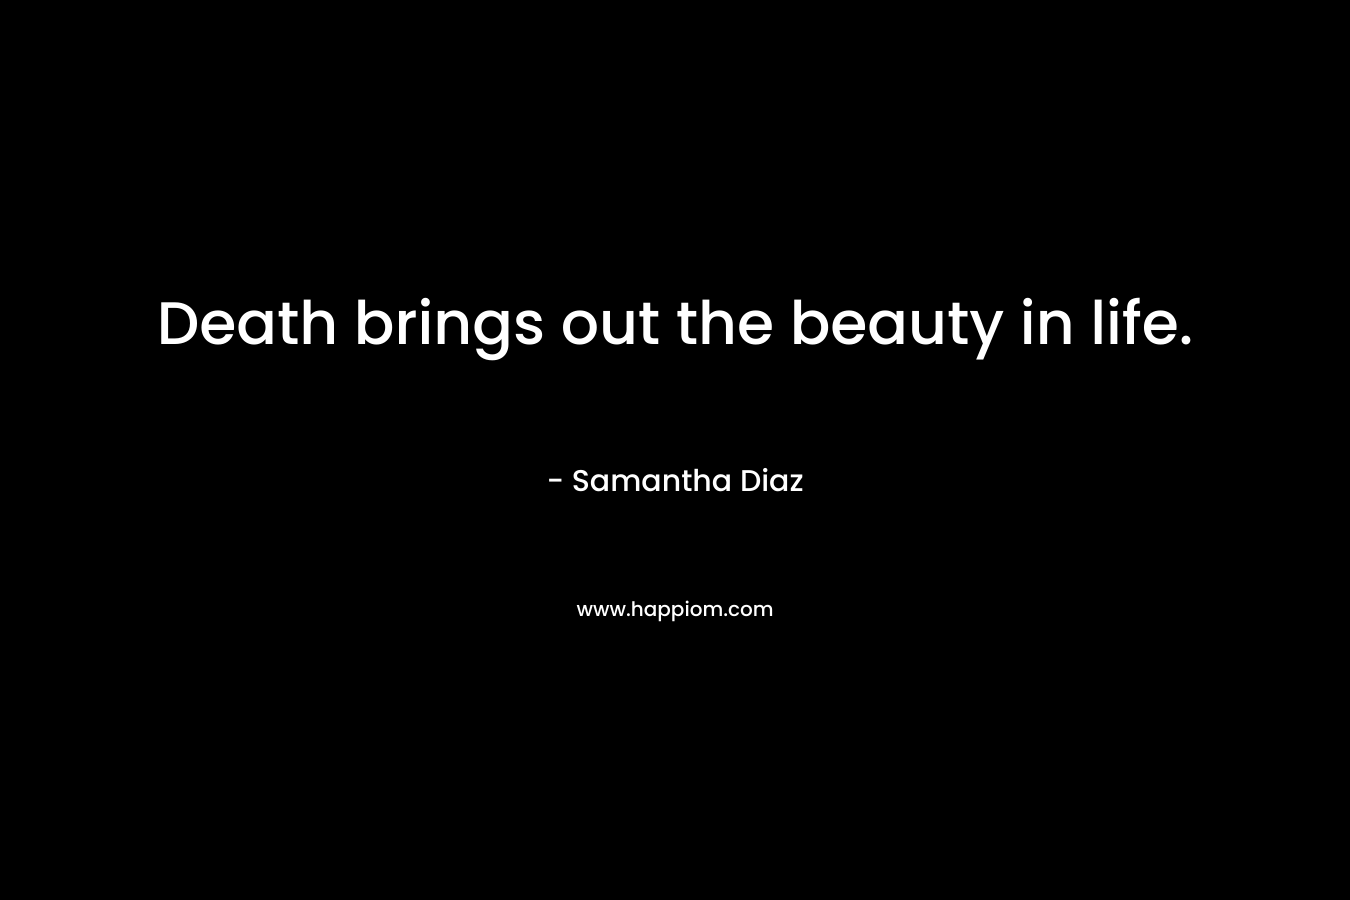 Death brings out the beauty in life. – Samantha Diaz